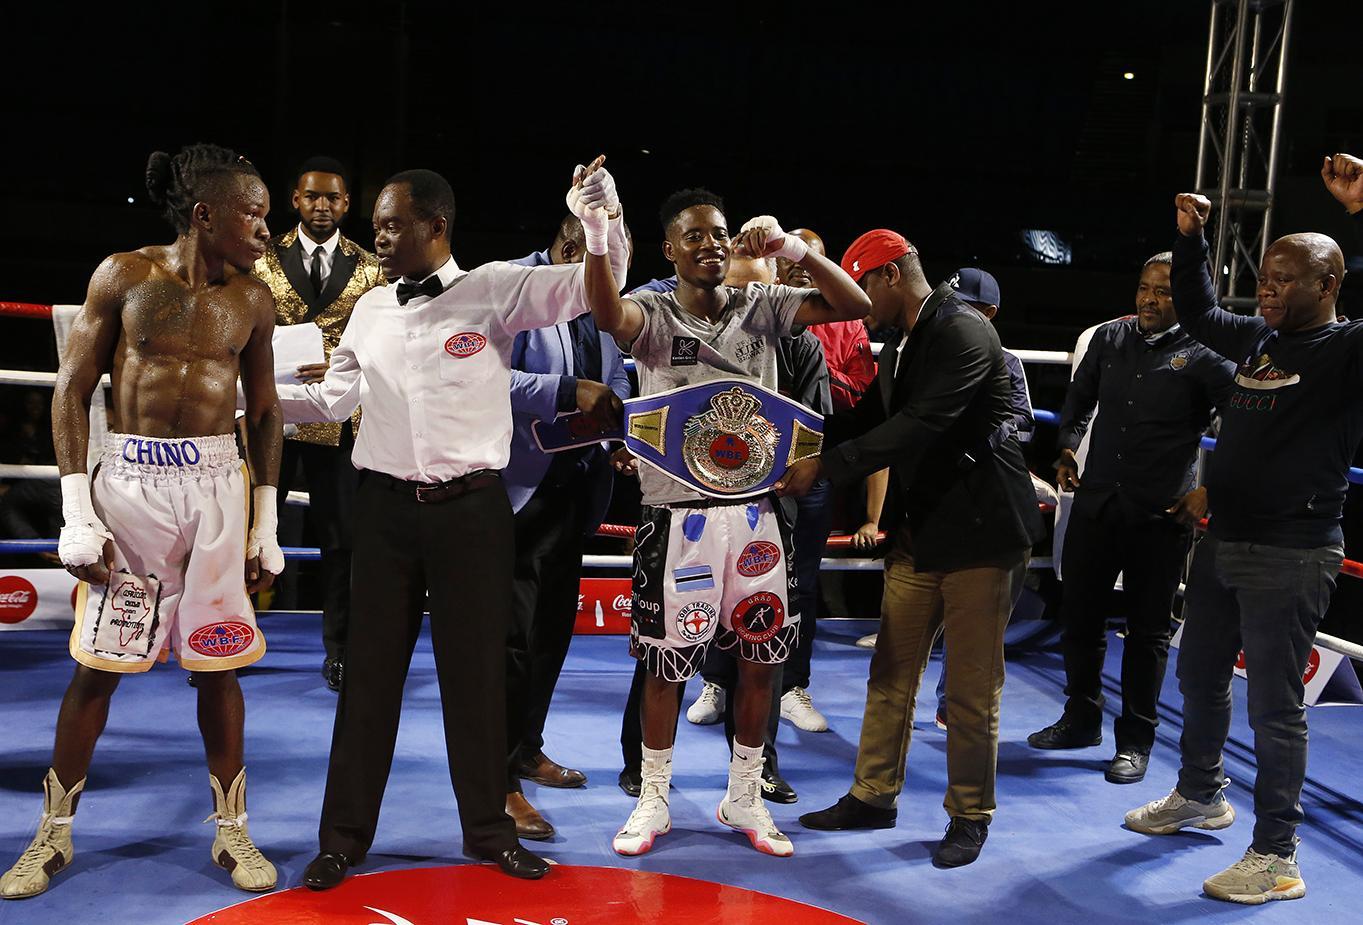 Bagwasi to defend WBF title today